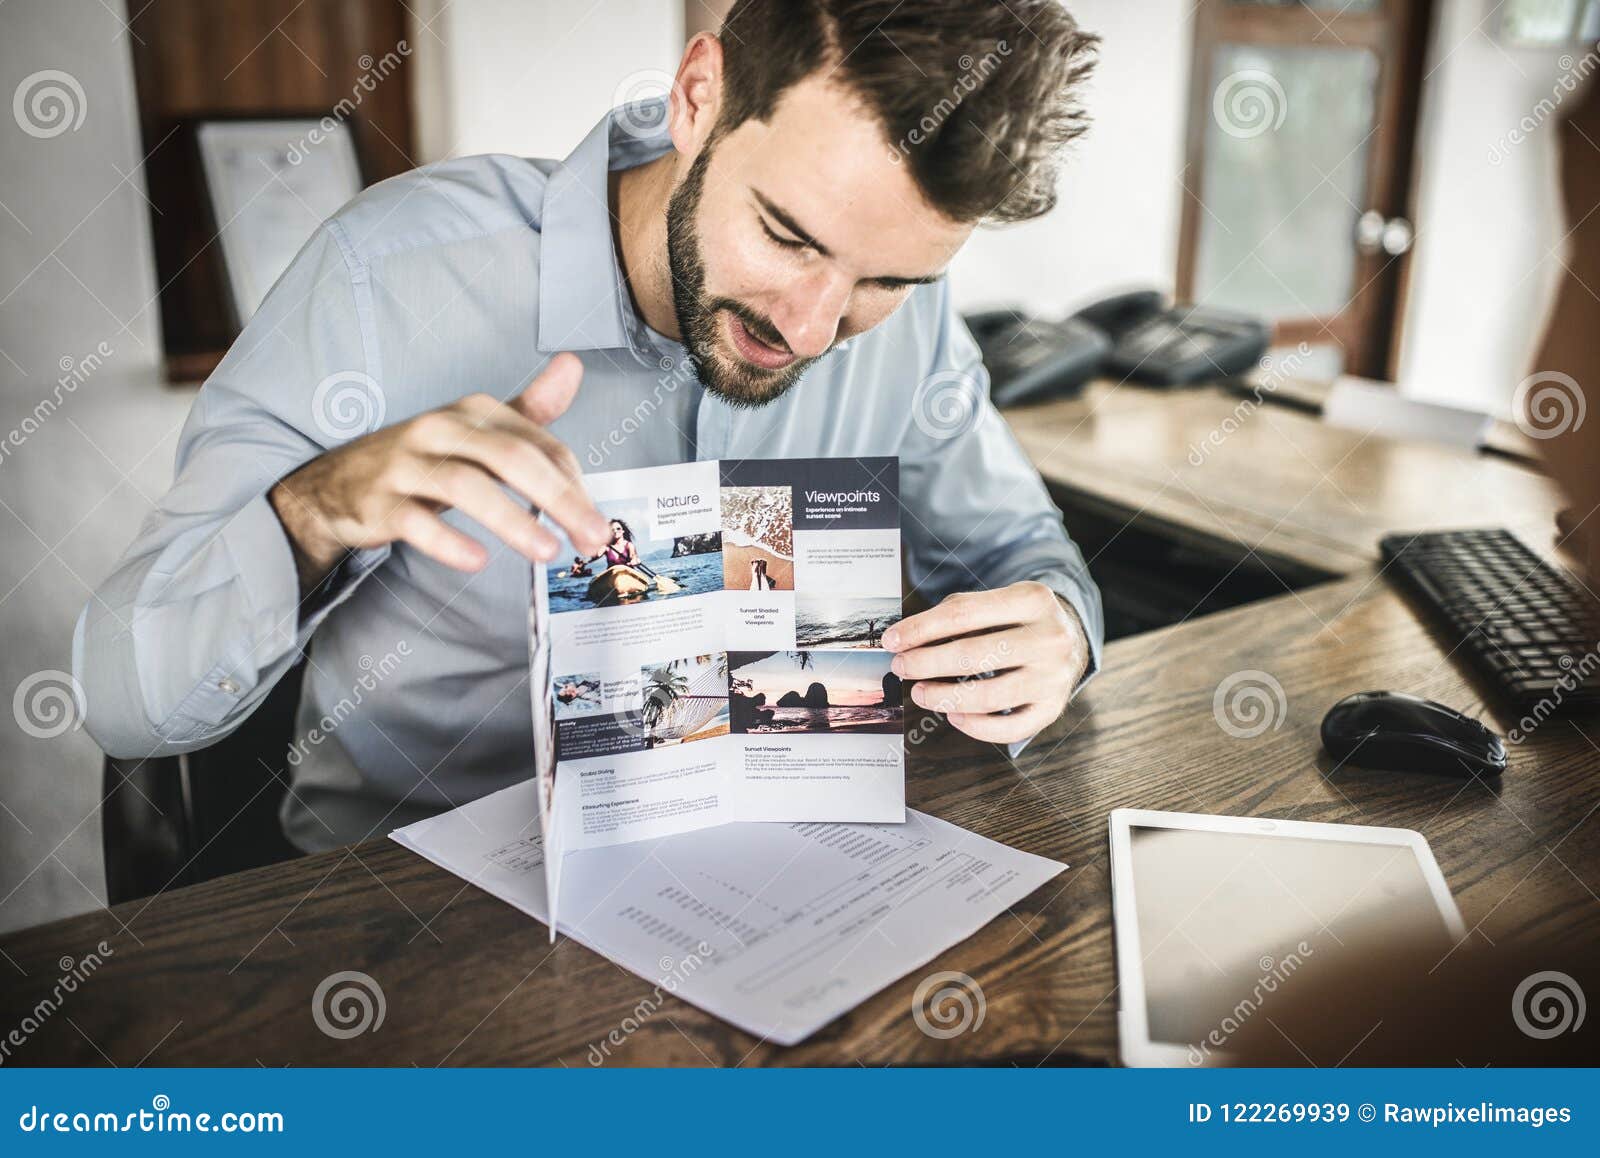 Receptionist Working At The Front Desk Stock Image Image Of